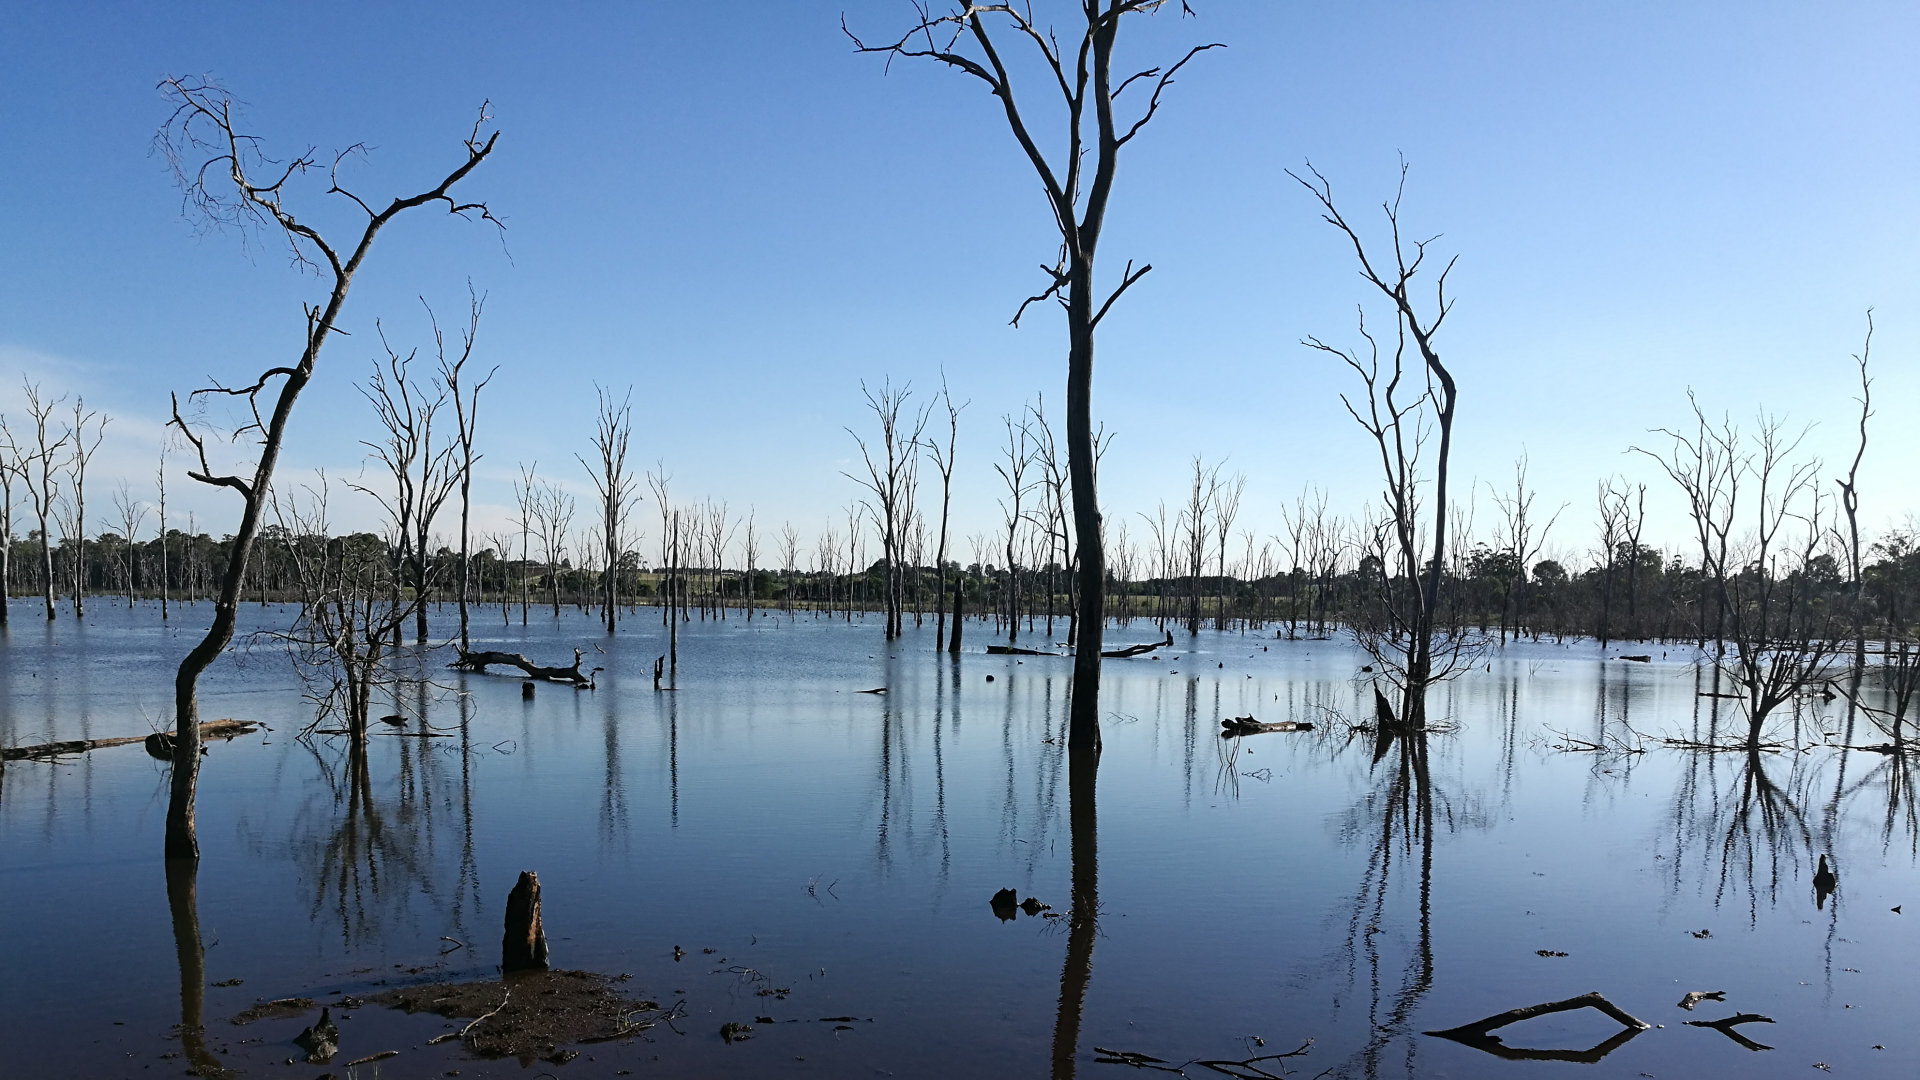 The Wooroolin Wetlands with skeletal remains of trees in the palustrine wetland (inland without flowing water). The wetlands has a walking trail and bird hide